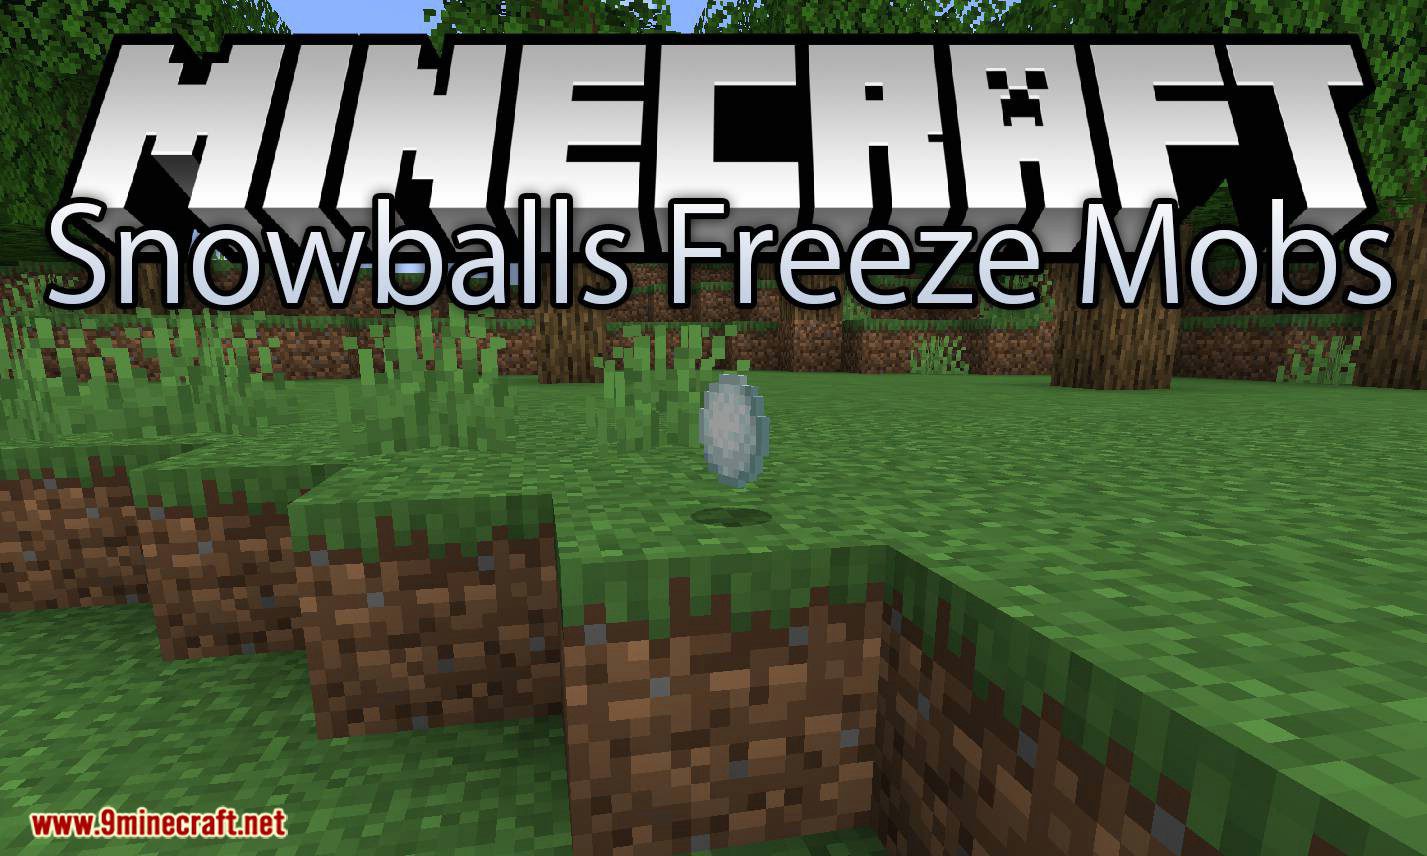 Snowballs Freeze Mobs Mod (1.20.4, 1.19.4) - Snowballs is More Powerful Now 1